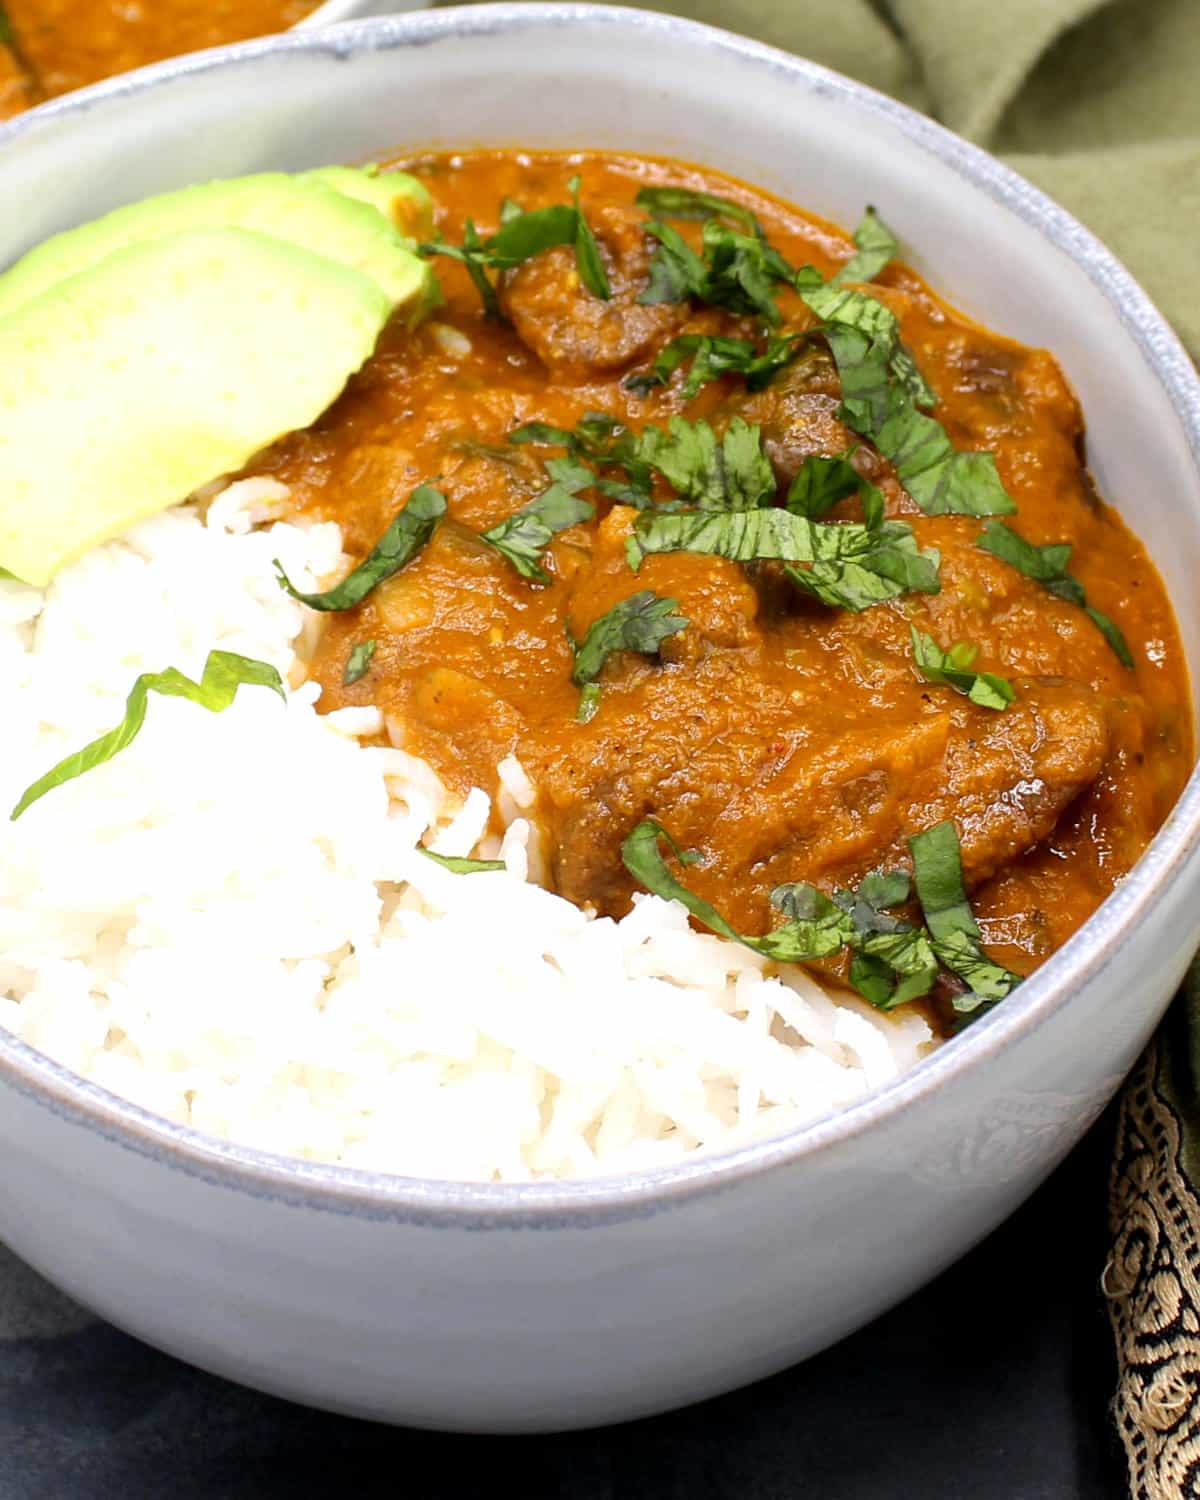 Chestnut xacuti in bowl with rice and avocado.